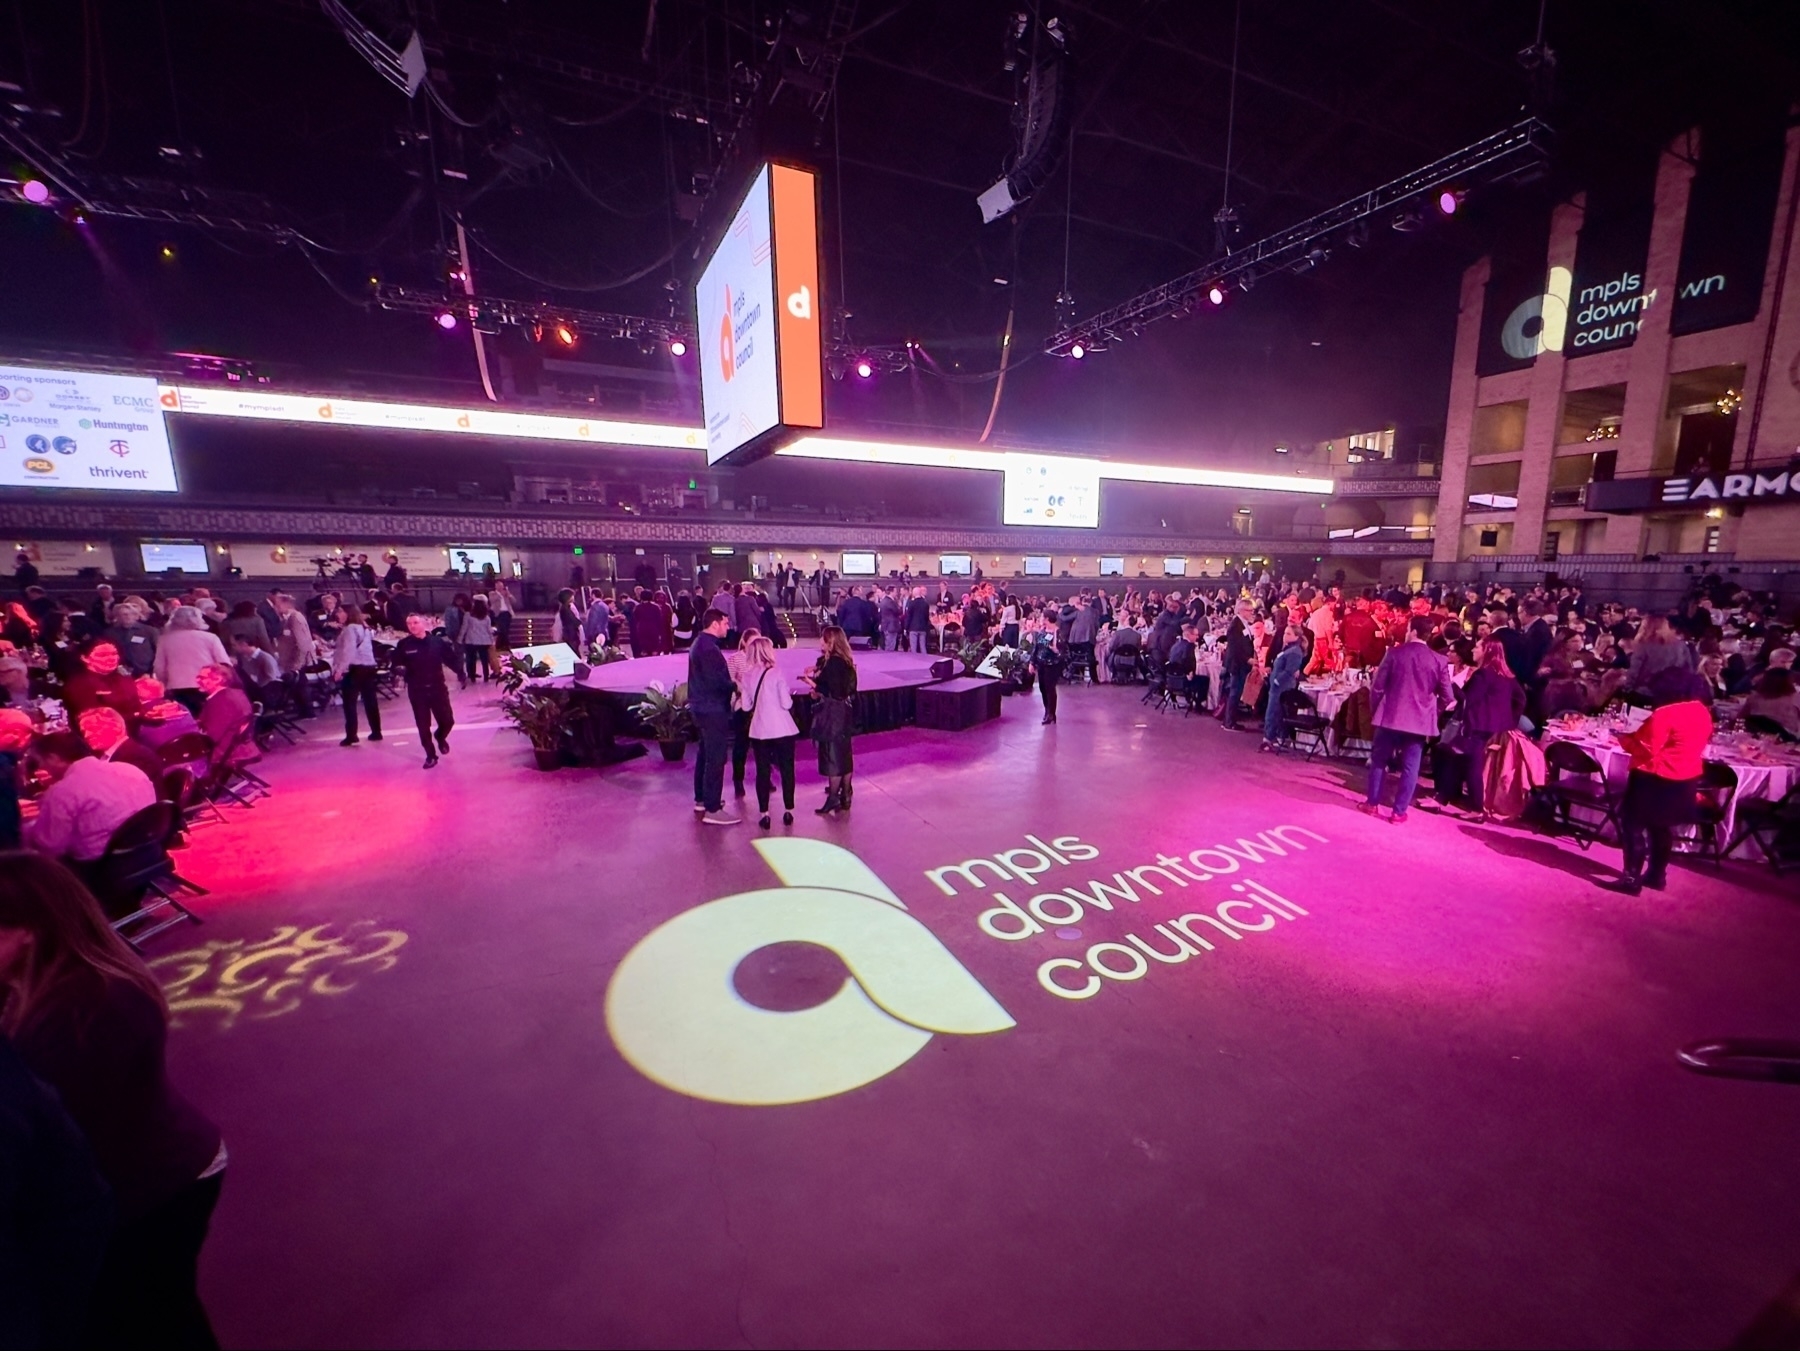 A large indoor event with crowds of people milling around tables, a projection screen displaying information, and the logo “mpls downtown council” illuminated on the floor.